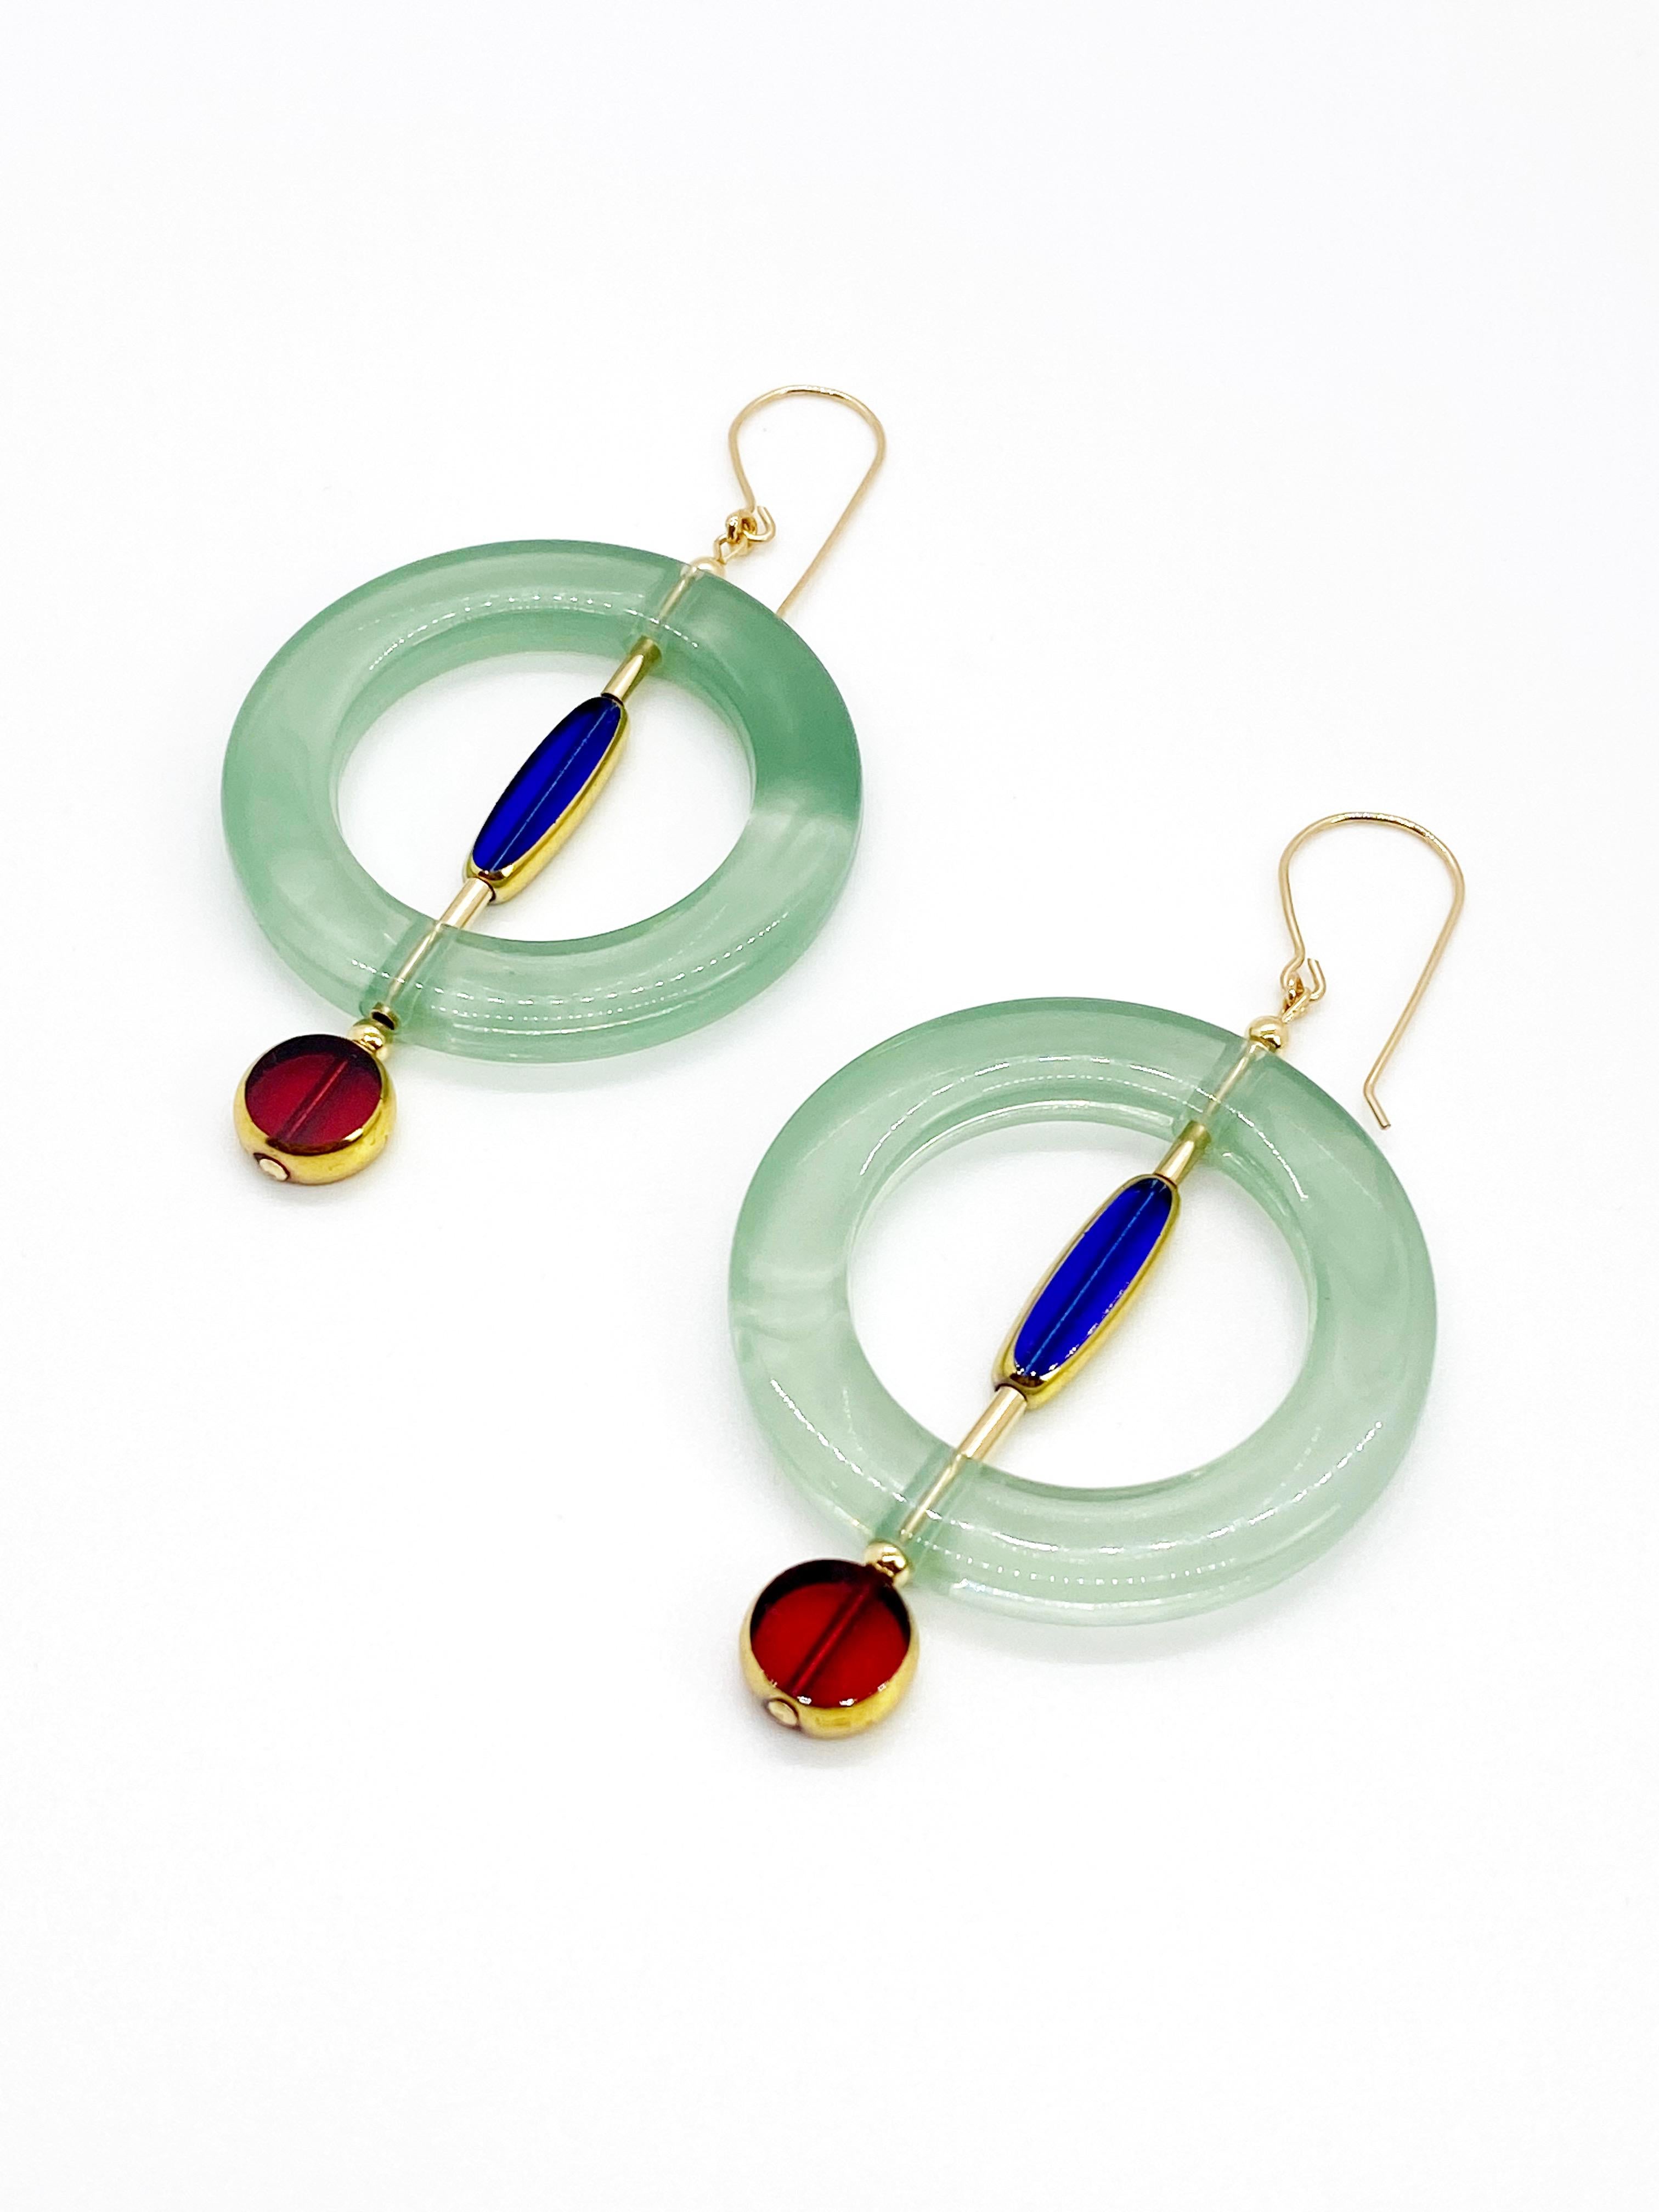 Each earring consist of 2 translucent German vintage glass beads that are framed with 24K gold with vintage lucite ring. They are accented with gold filled round beads and tube beads. The earrings are finished with 14K gold-filled ear wire. 

The